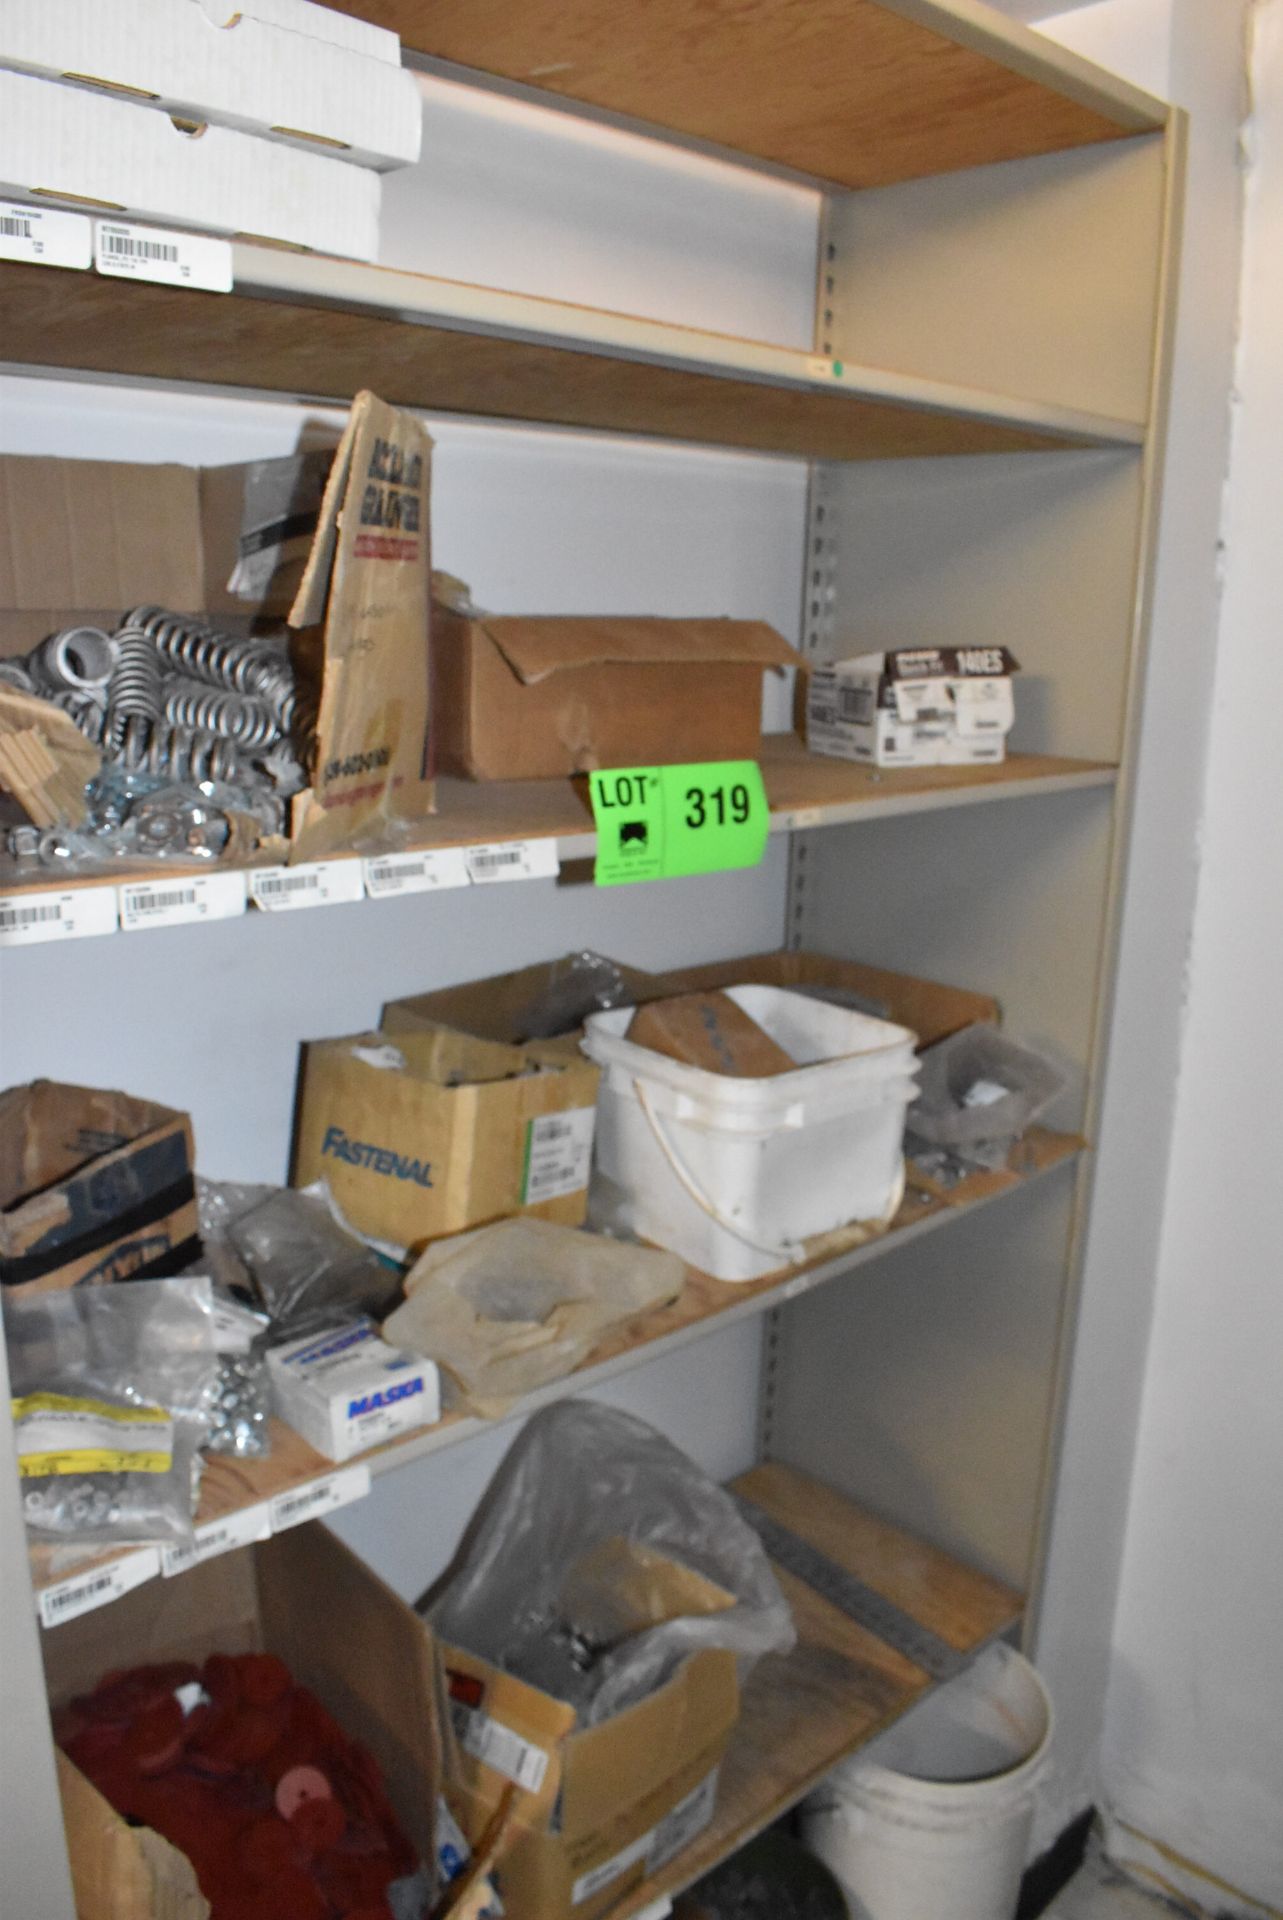 LOT/ CONTENTS OF SHELF CONSISTING OF HARDWARE AND SUPPLIES [RIGGING FEE FOR LOT #319 - $120 CAD PLUS